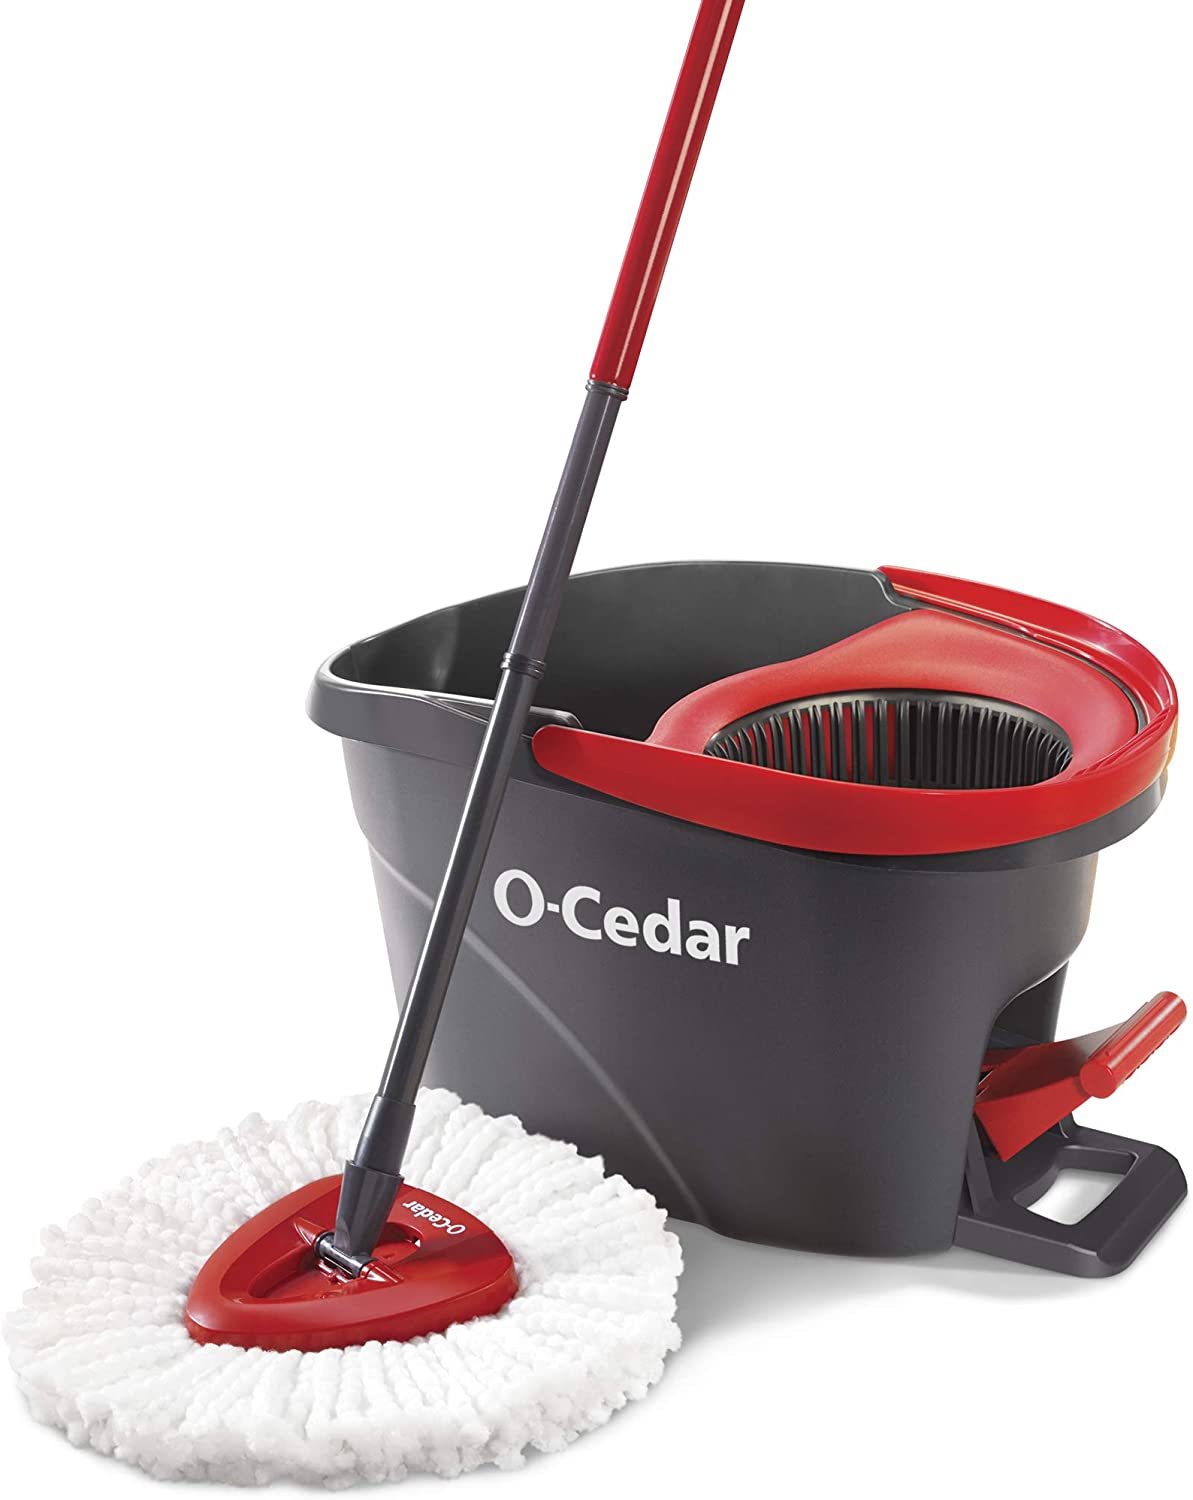 O-Cedar EasyWring Microfiber Spin Mop, Bucket Floor Cleaning System, Red, Gray 8